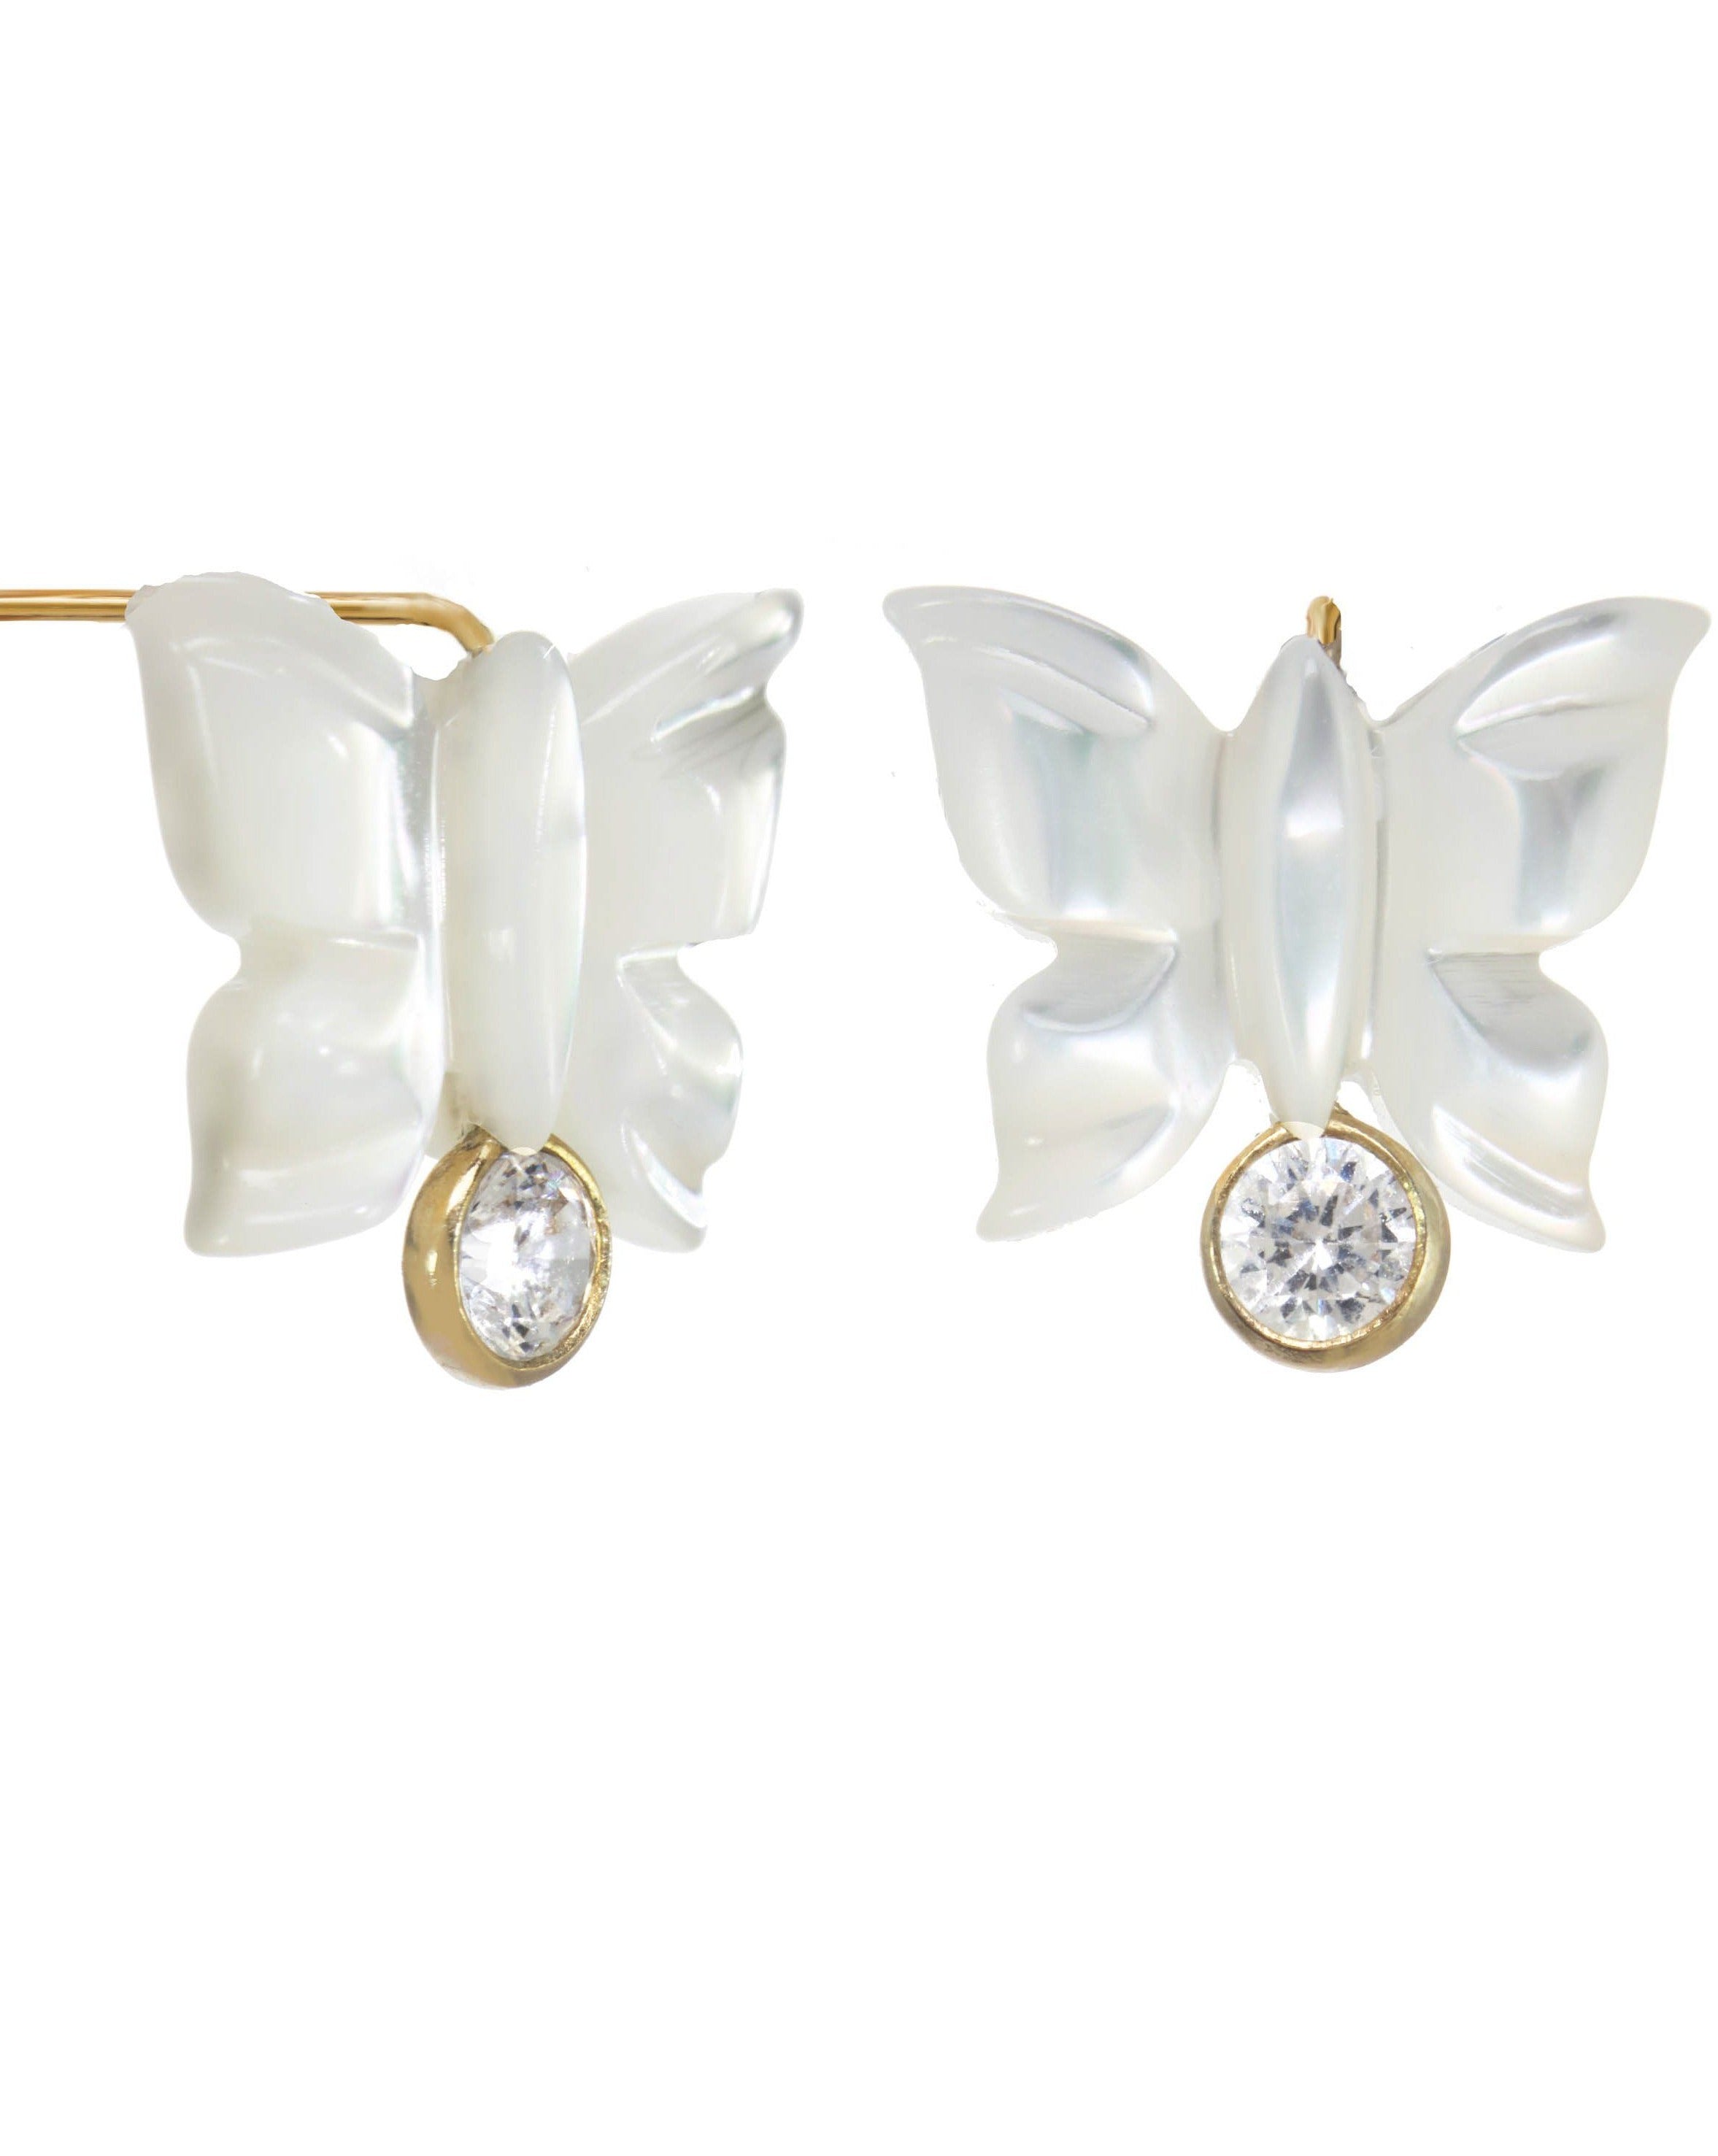 Sevyn Earrings by KOZAKH. Stud earrings, crafted in 14K Gold Filled, featuring a hand carved butterfly charm and a bezel set Cubic Zirconia.